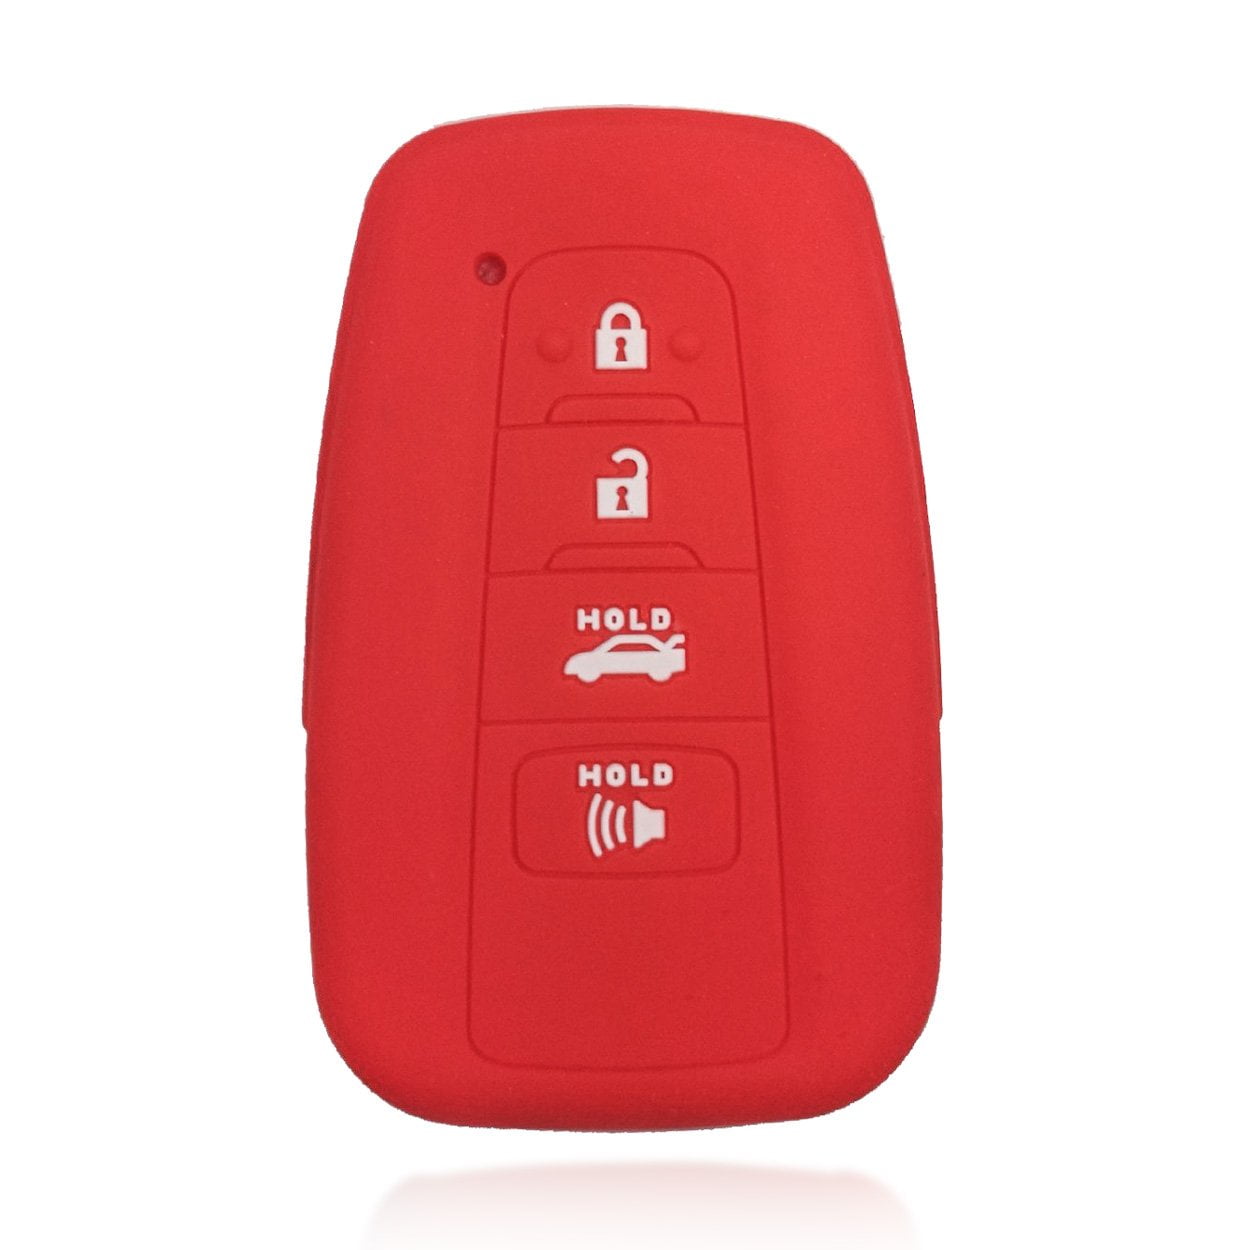 New Red Silicone Remote Key Cover Holder Cover 3 Buttons Fit For Toyota 